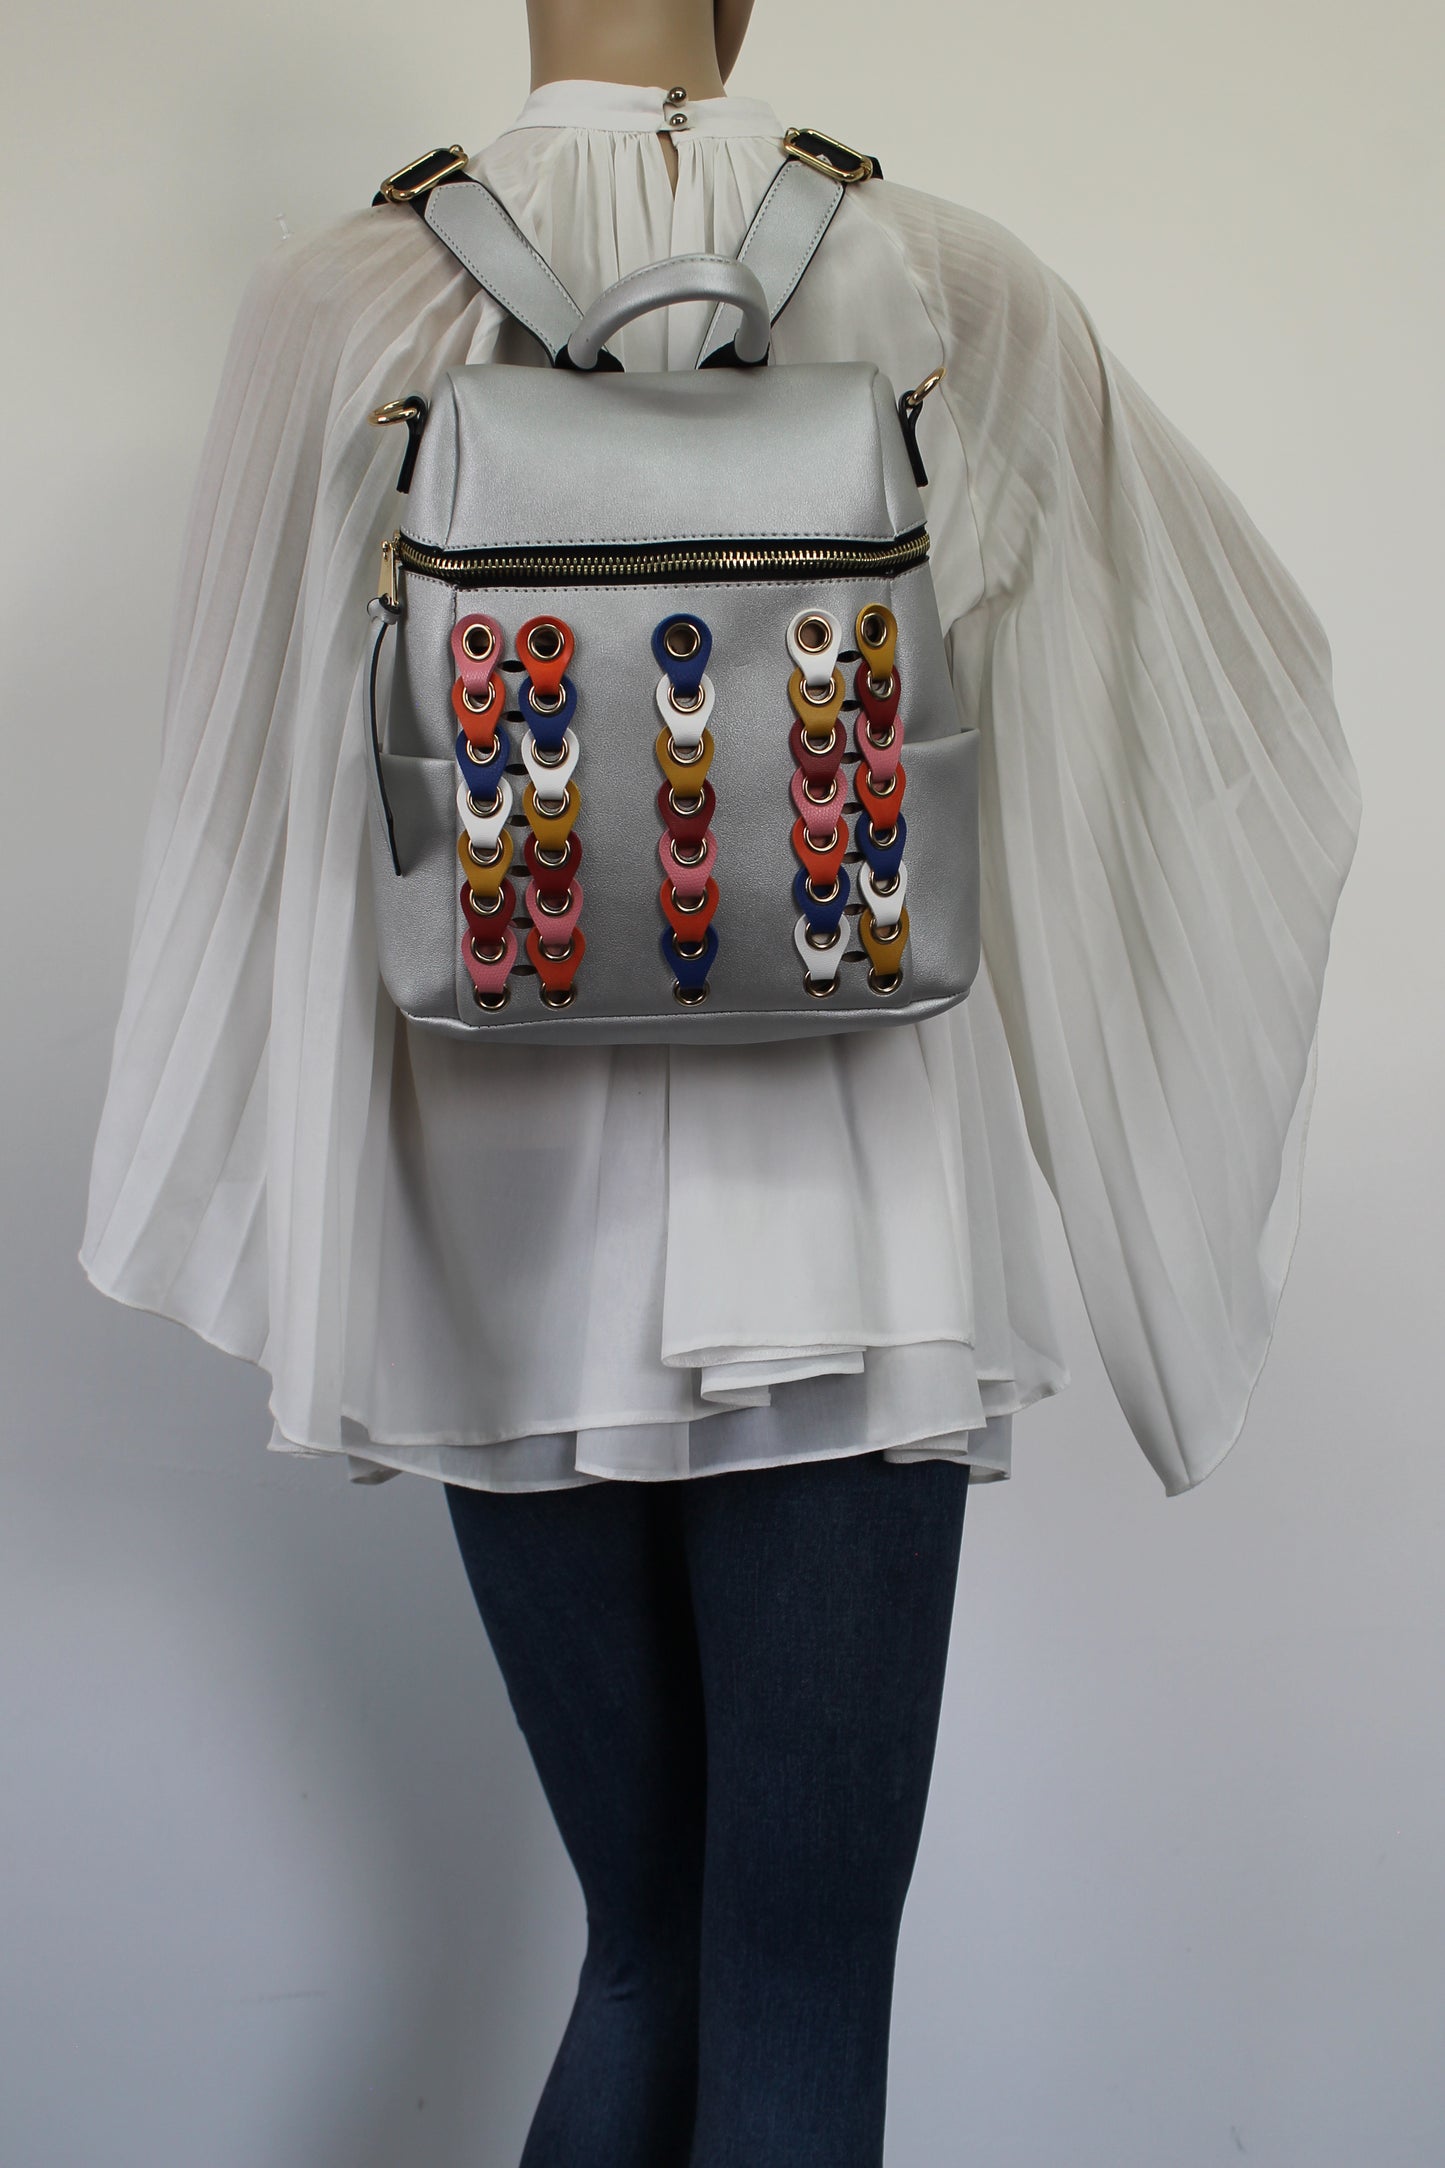 Swanky Swans Brandy Backpack Silver Perfect Backpack for school!